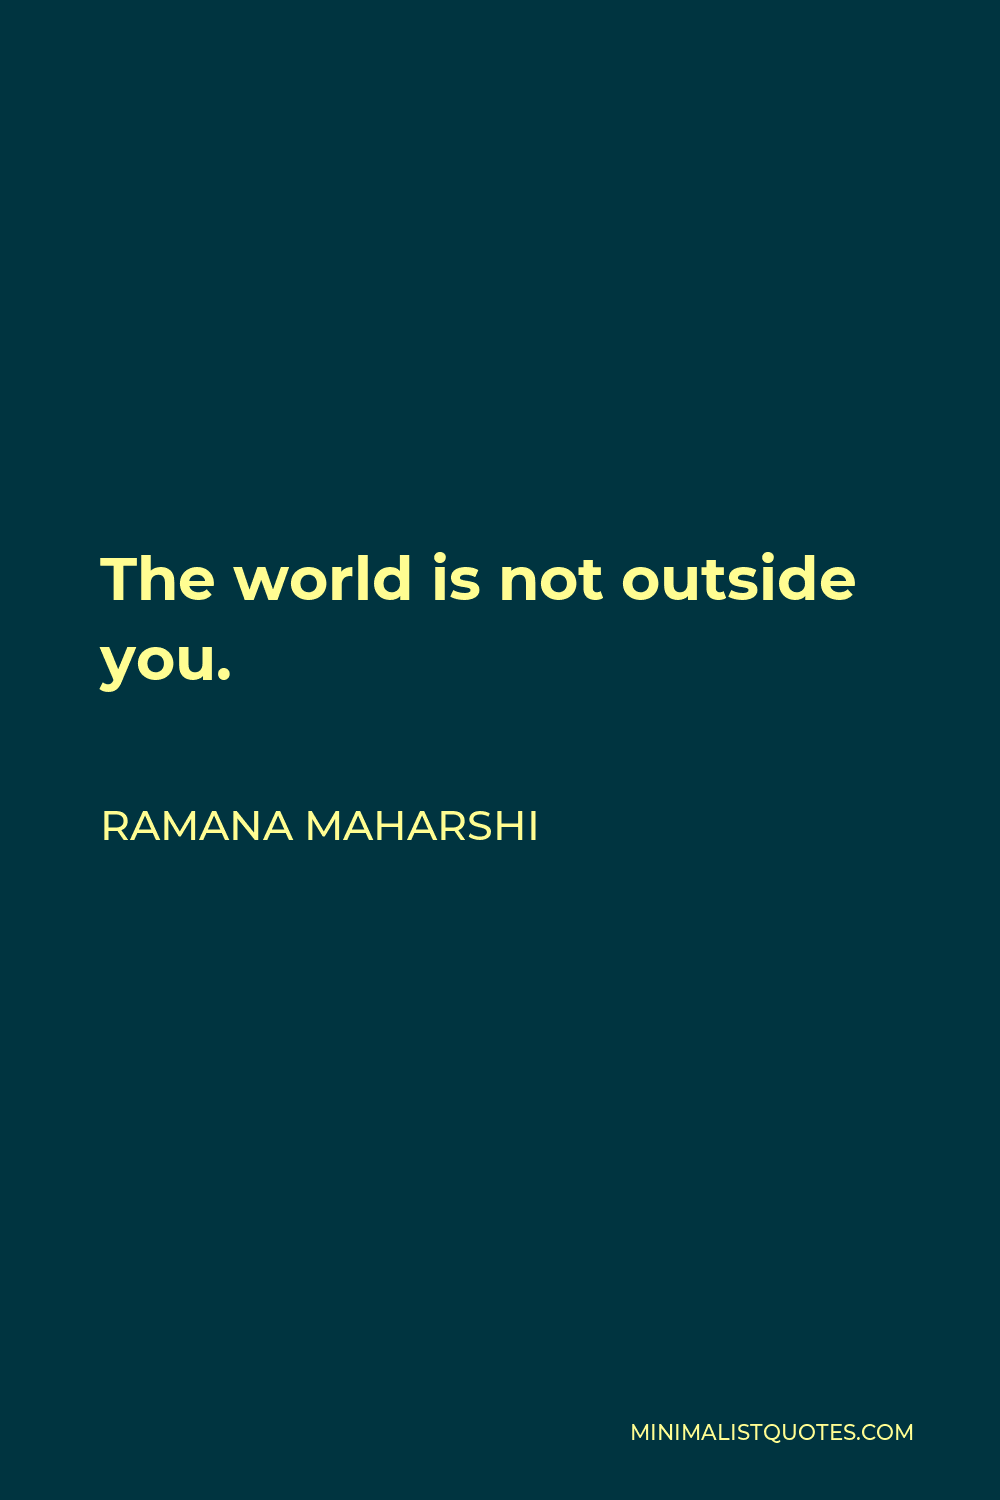 Ramana Maharshi Quote - The world is not outside you.